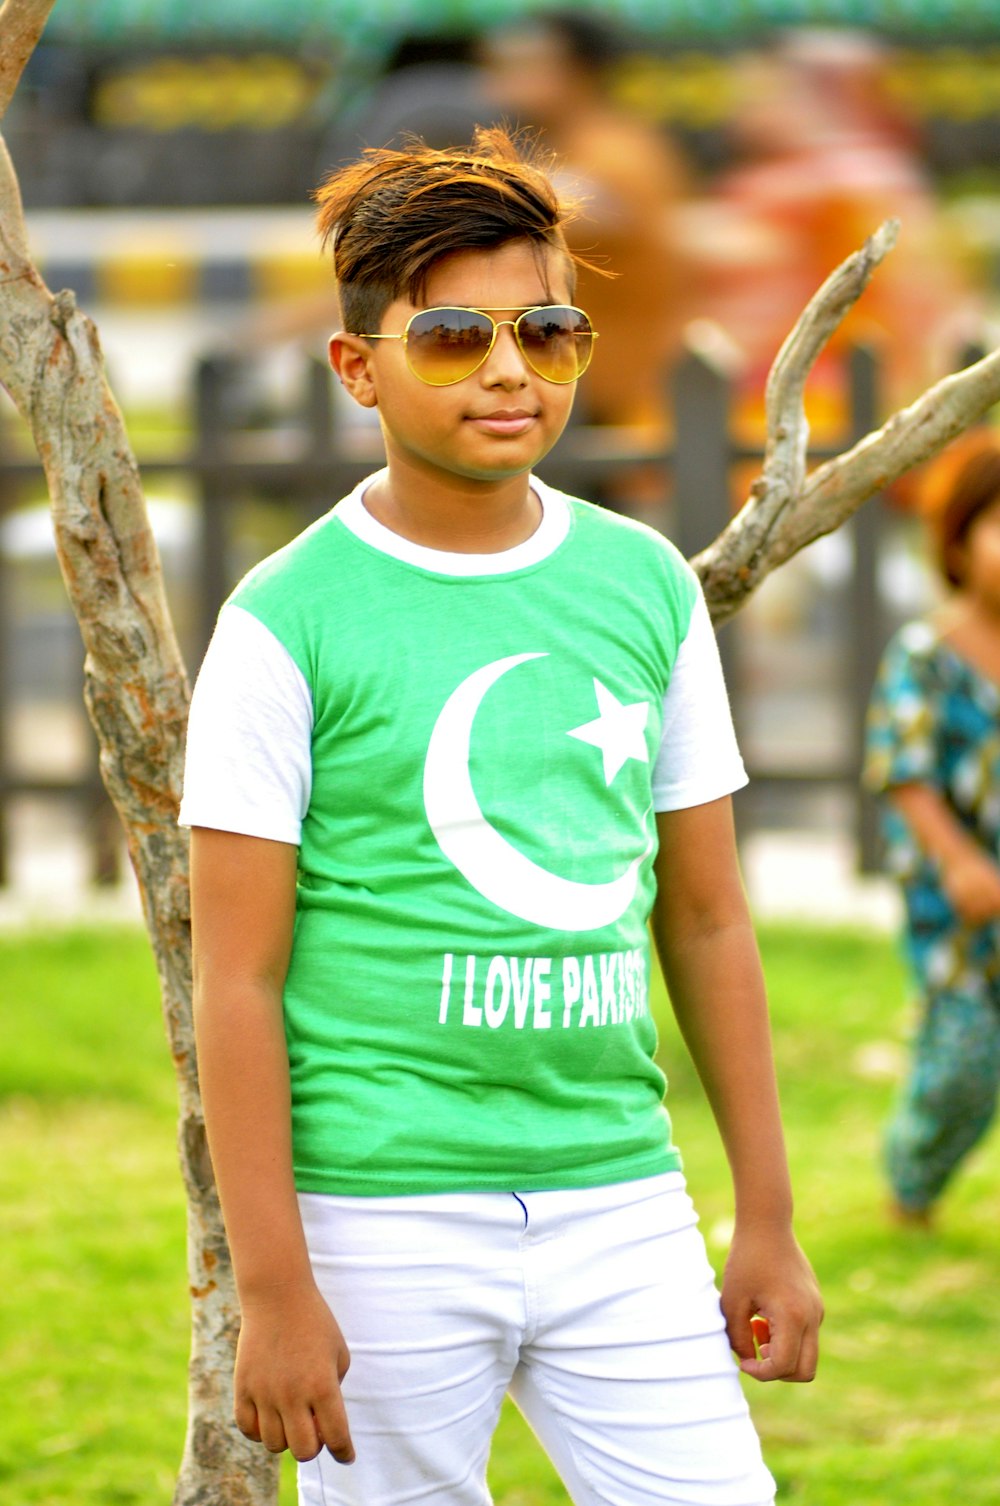 man in white and green crew neck t-shirt wearing sunglasses standing beside tree during daytime